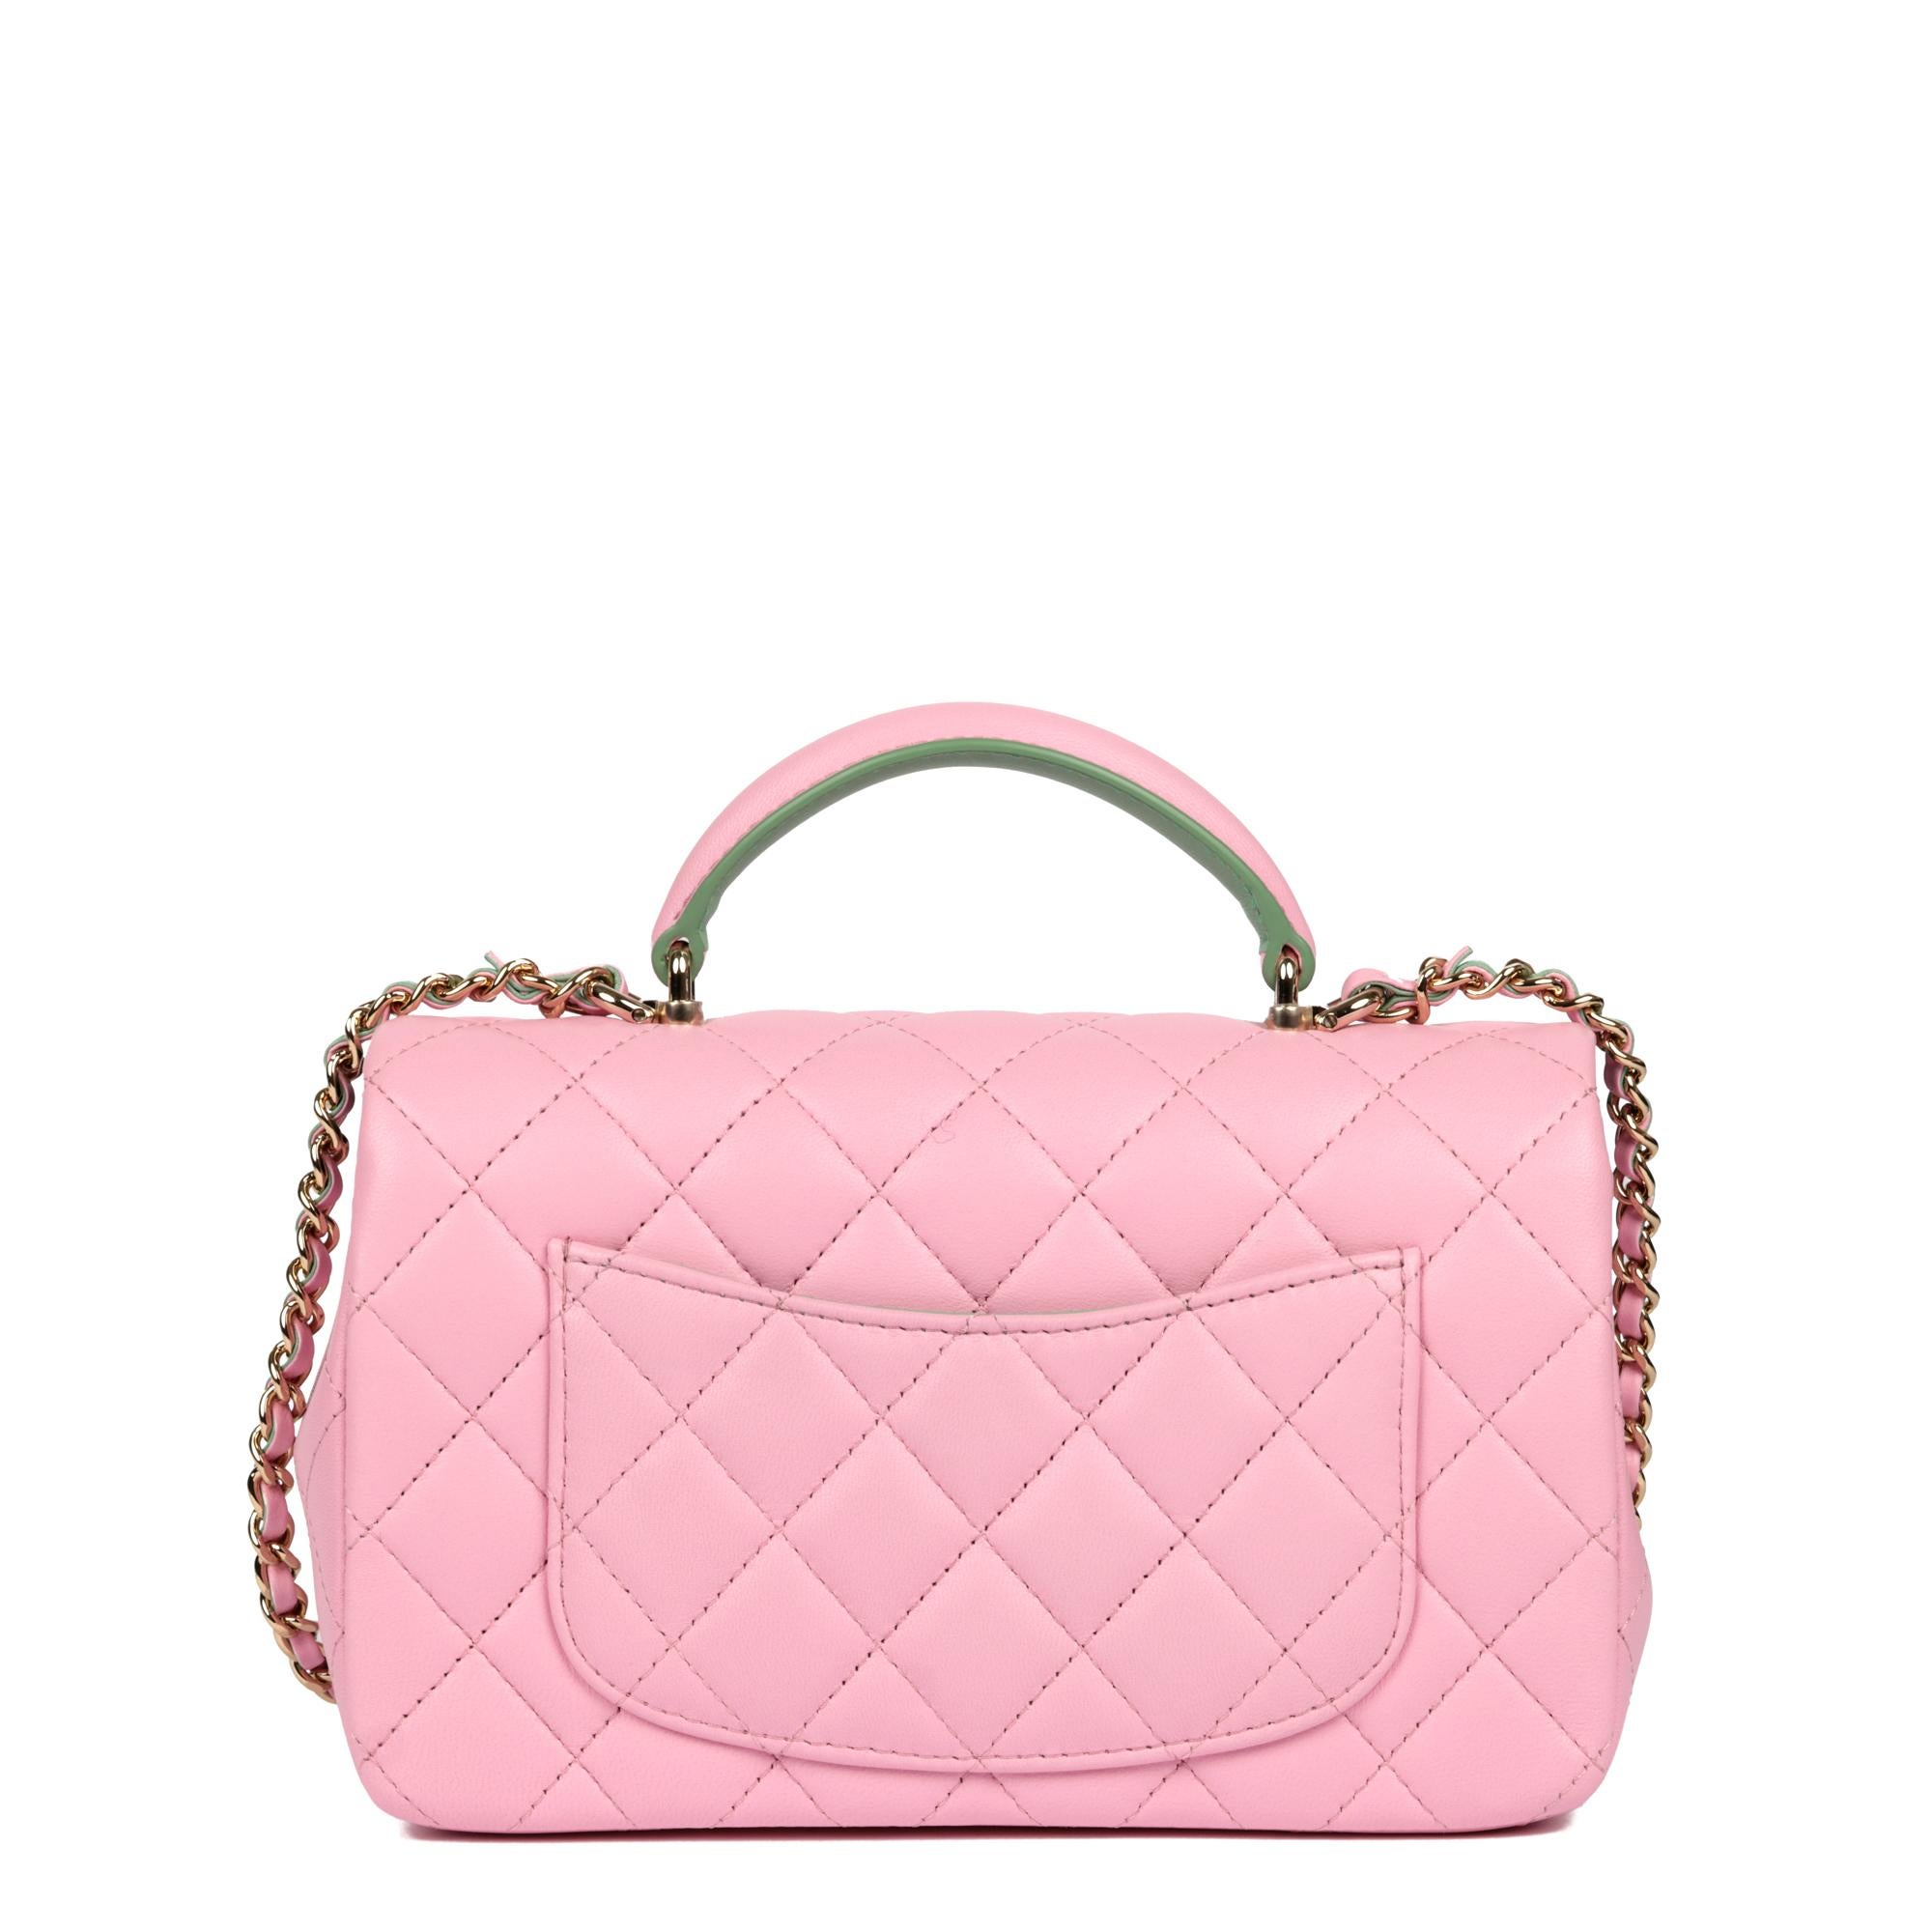 Chanel Pink & Green Quilted Lambskin Rectangular Mini Flap Bag with Top Handle For Sale 1